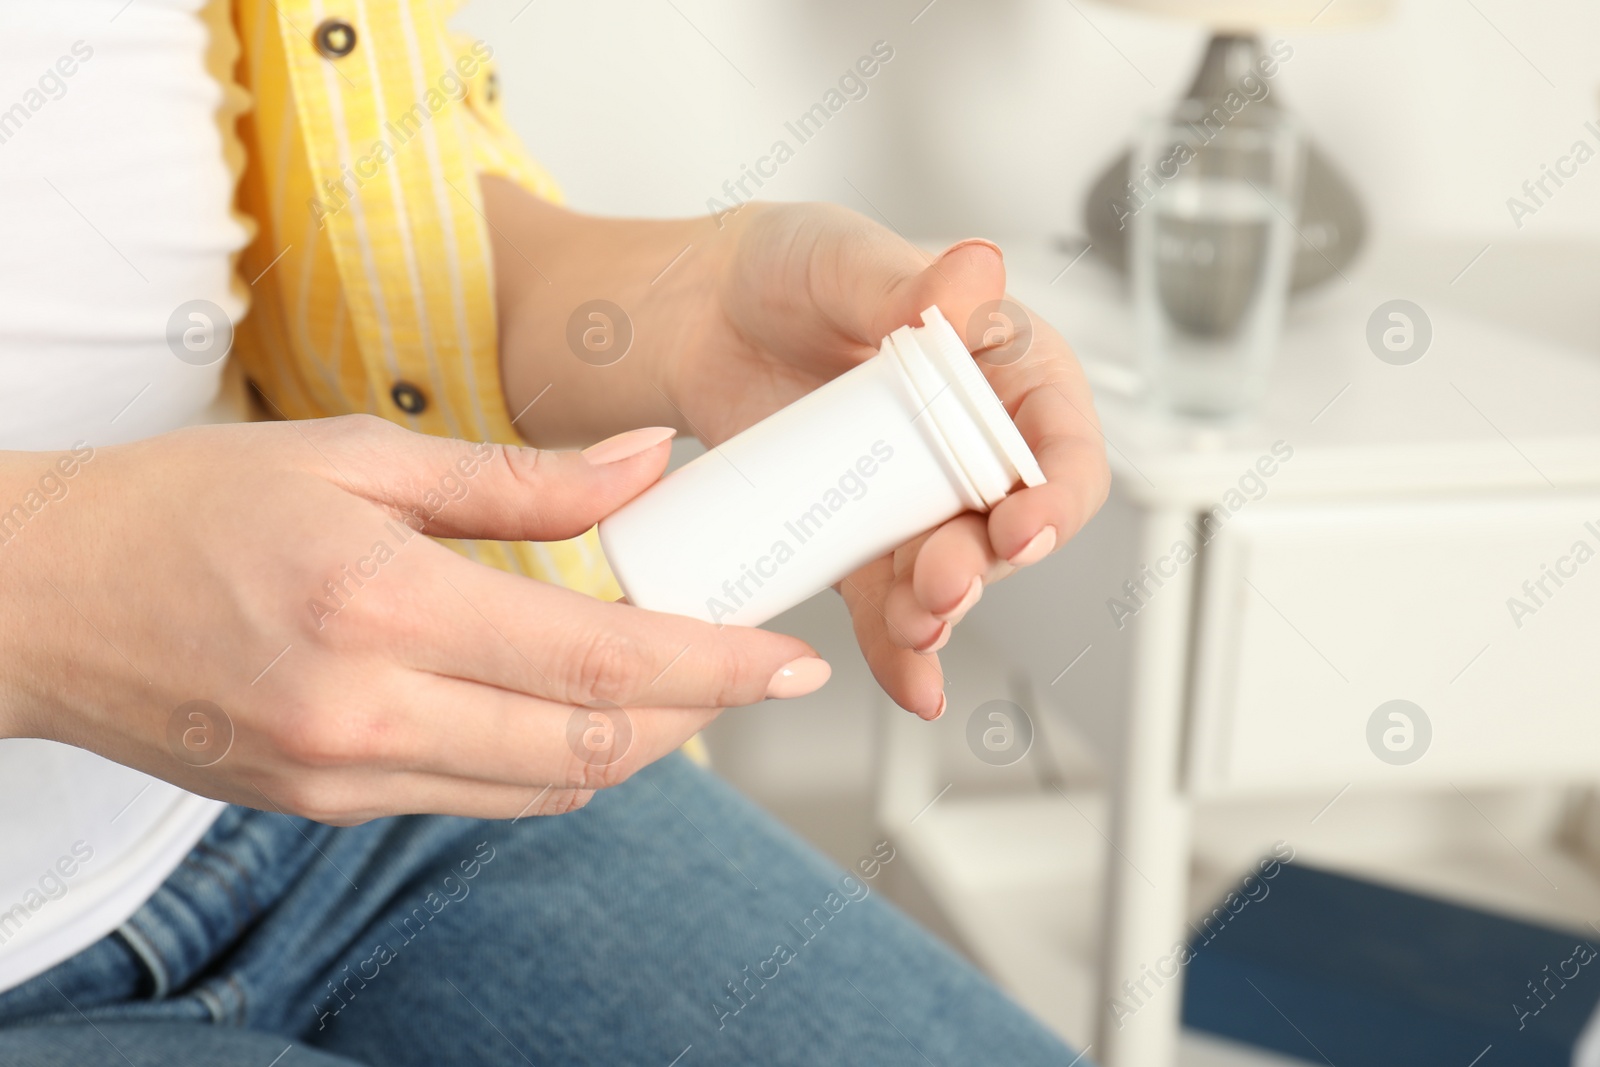 Photo of Woman holding bottle of pills indoors, closeup view